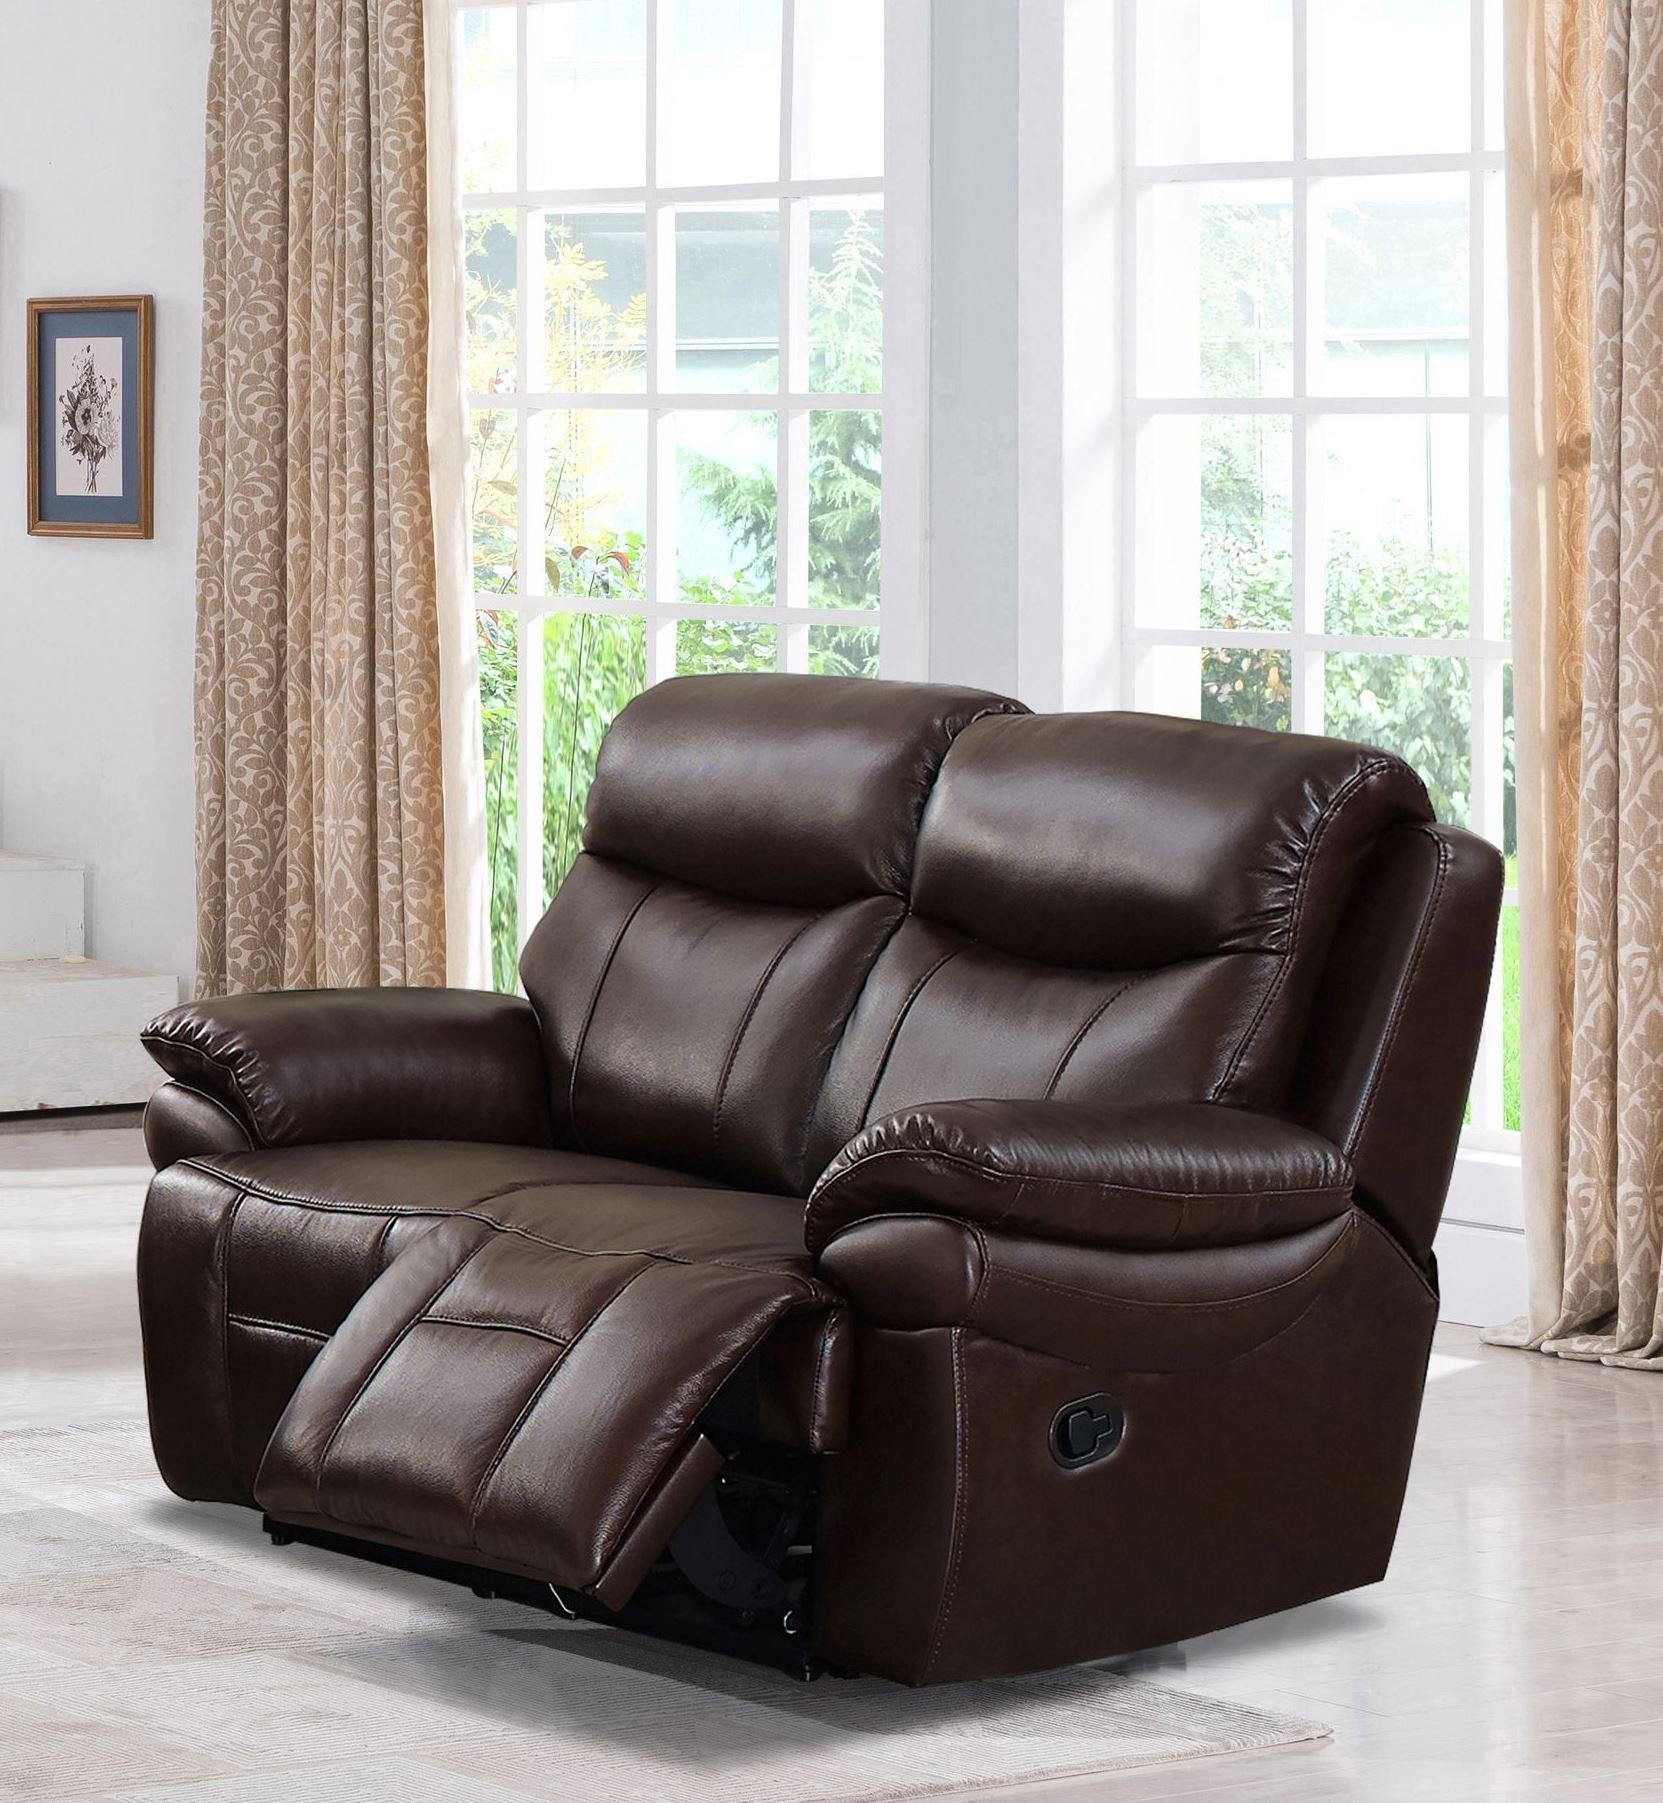 Hydeline Fraser Brown Top Grain Leather Reclining Loveseat From Amax Regarding Top Grain Leather Loveseats (Gallery 6 of 20)